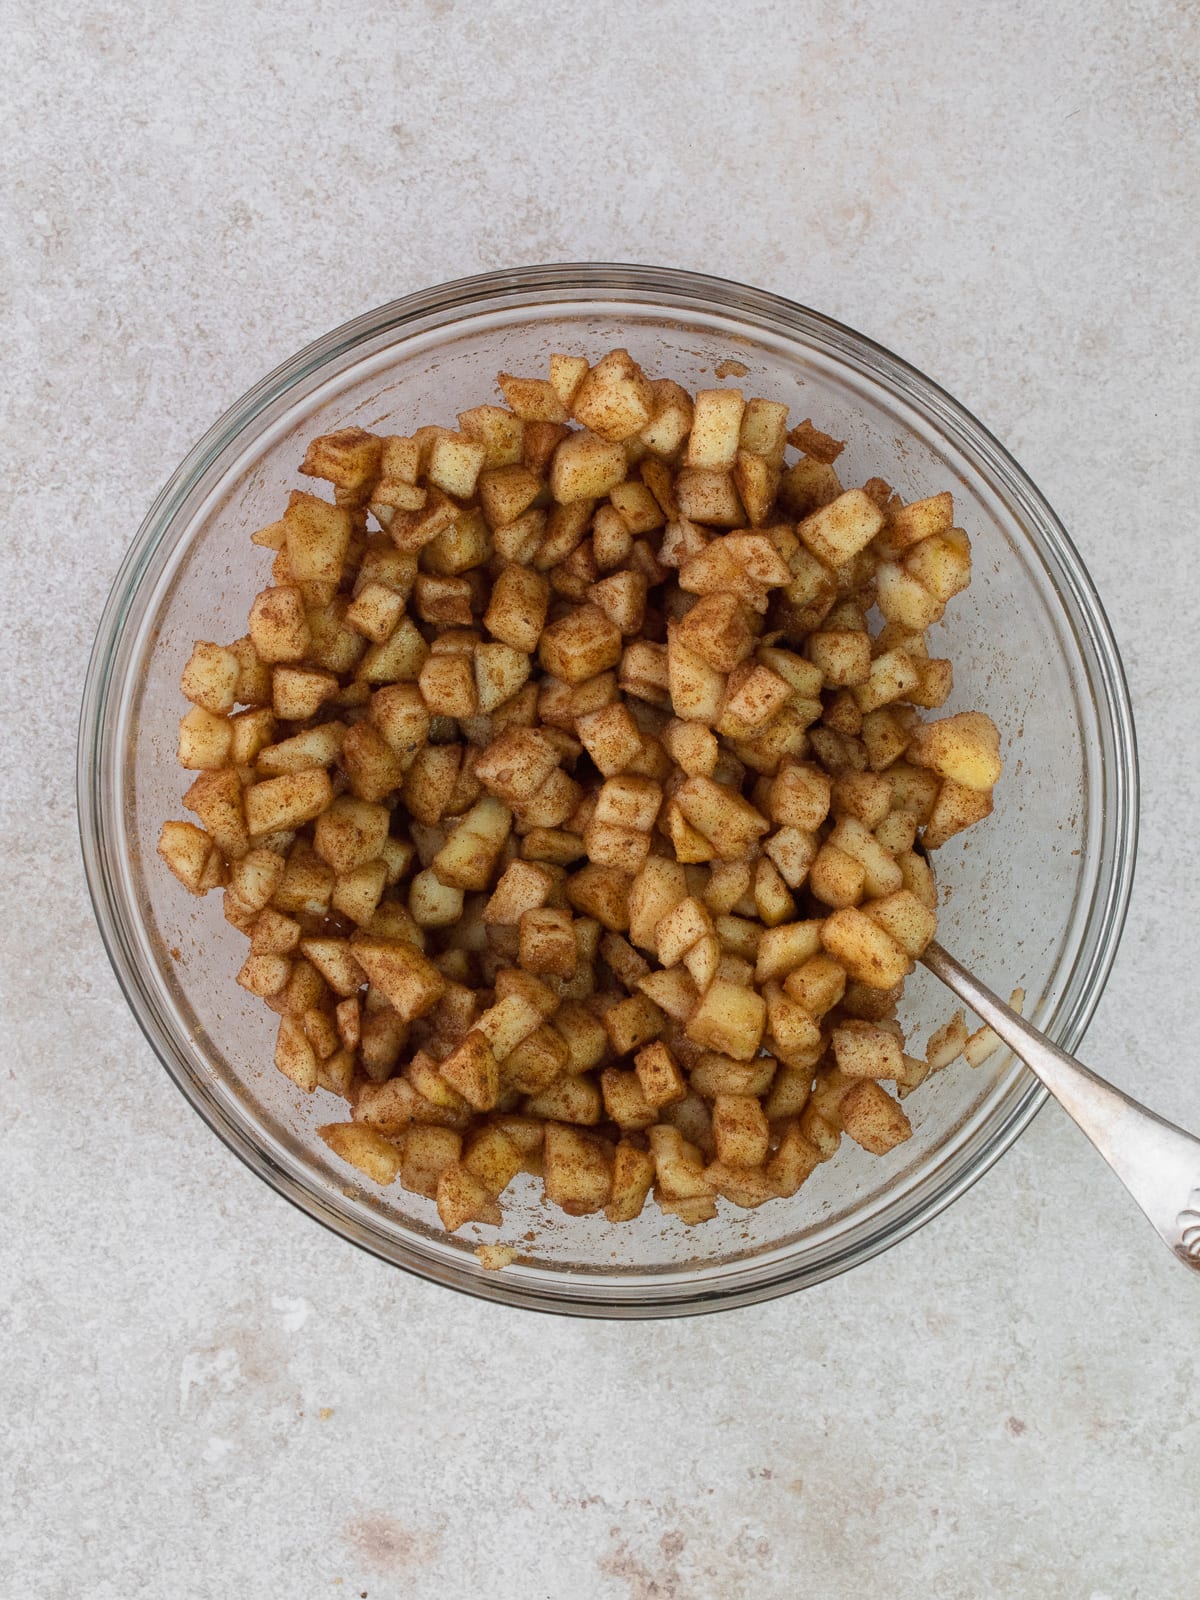 Spiced diced apples in a small glass bowl